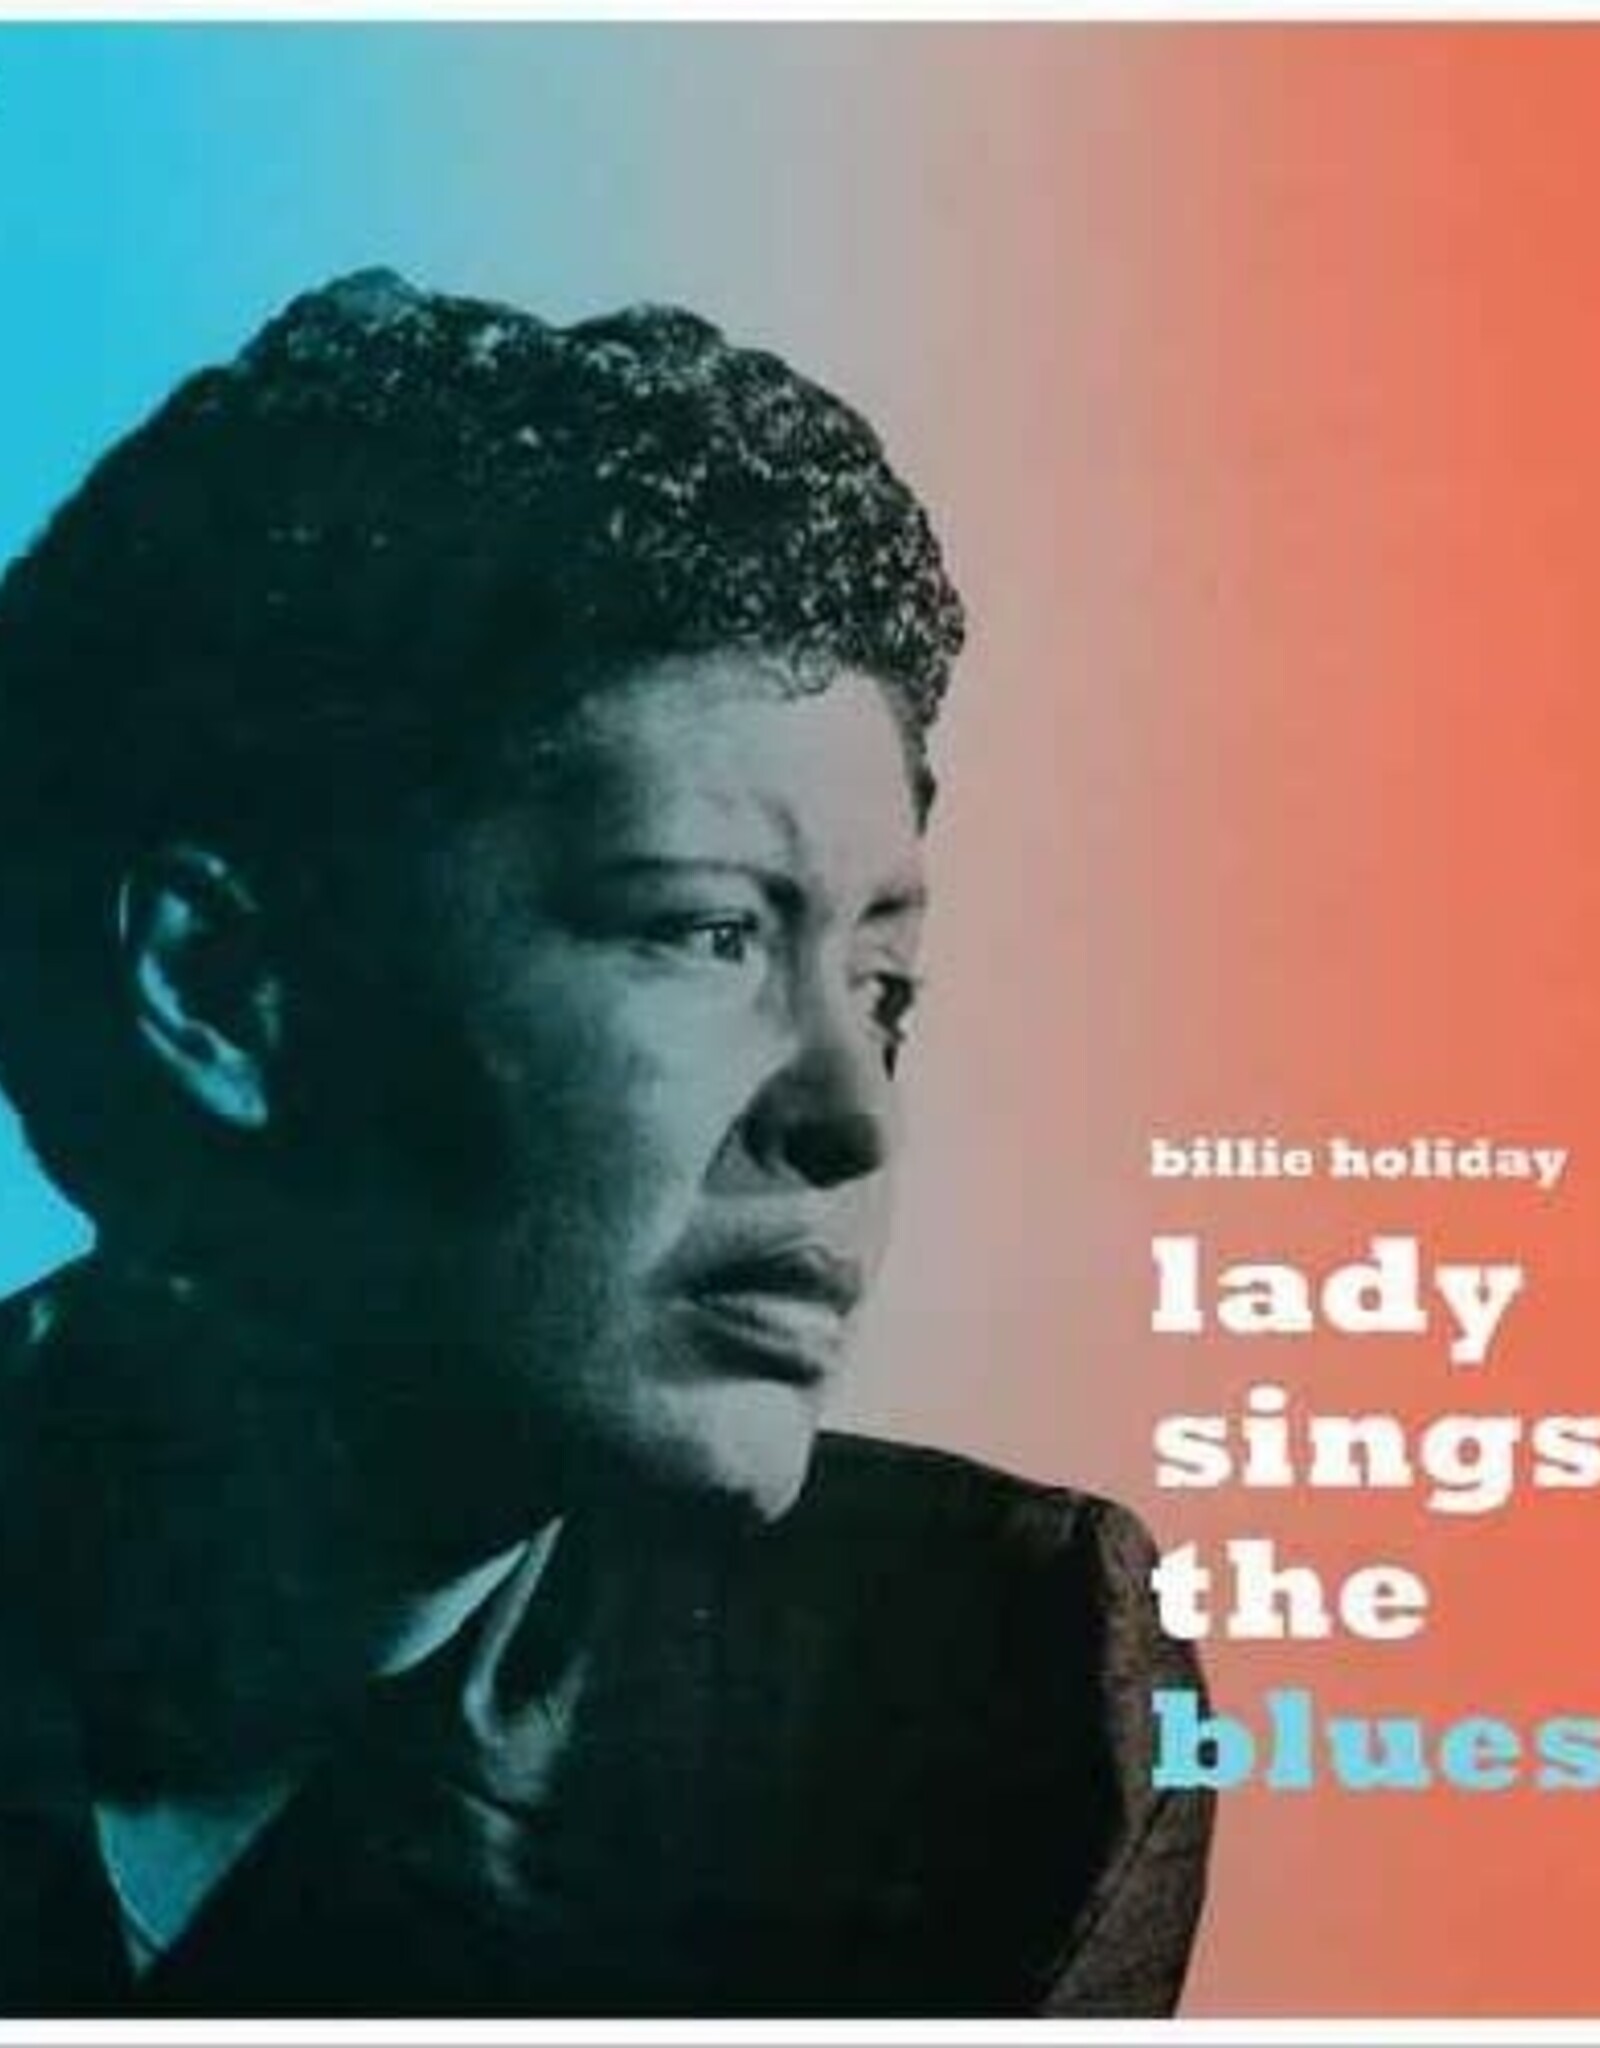 Billie Holiday - Lady Sings The Blues